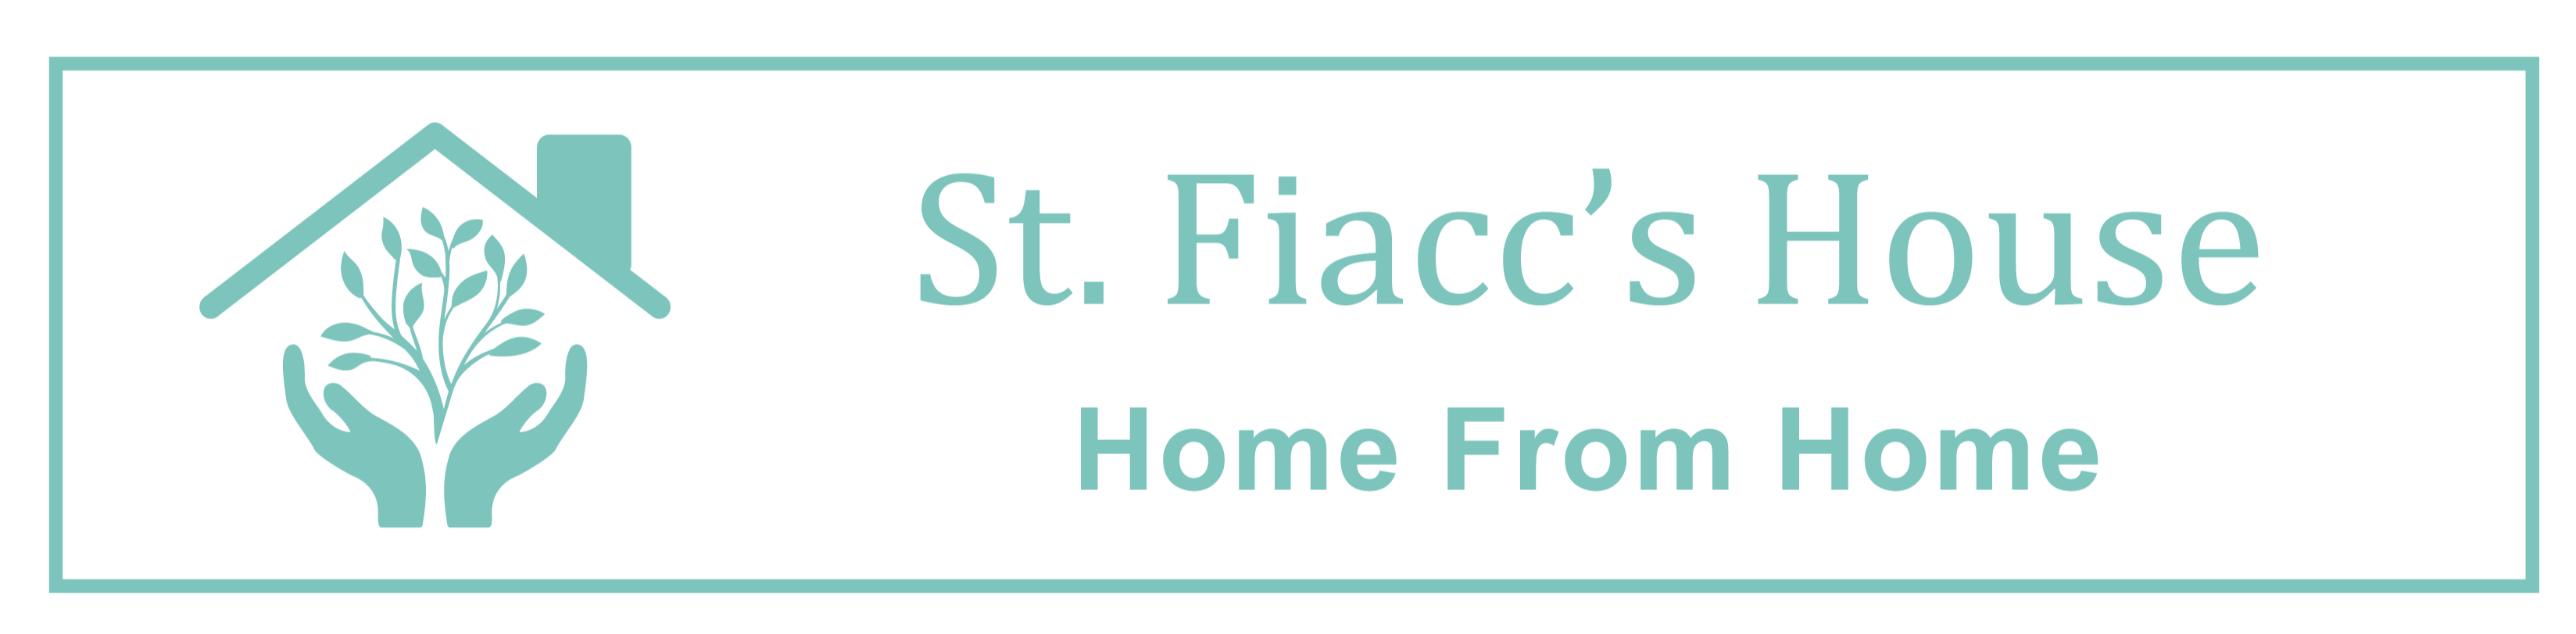 St. Fiacc's House CLG.